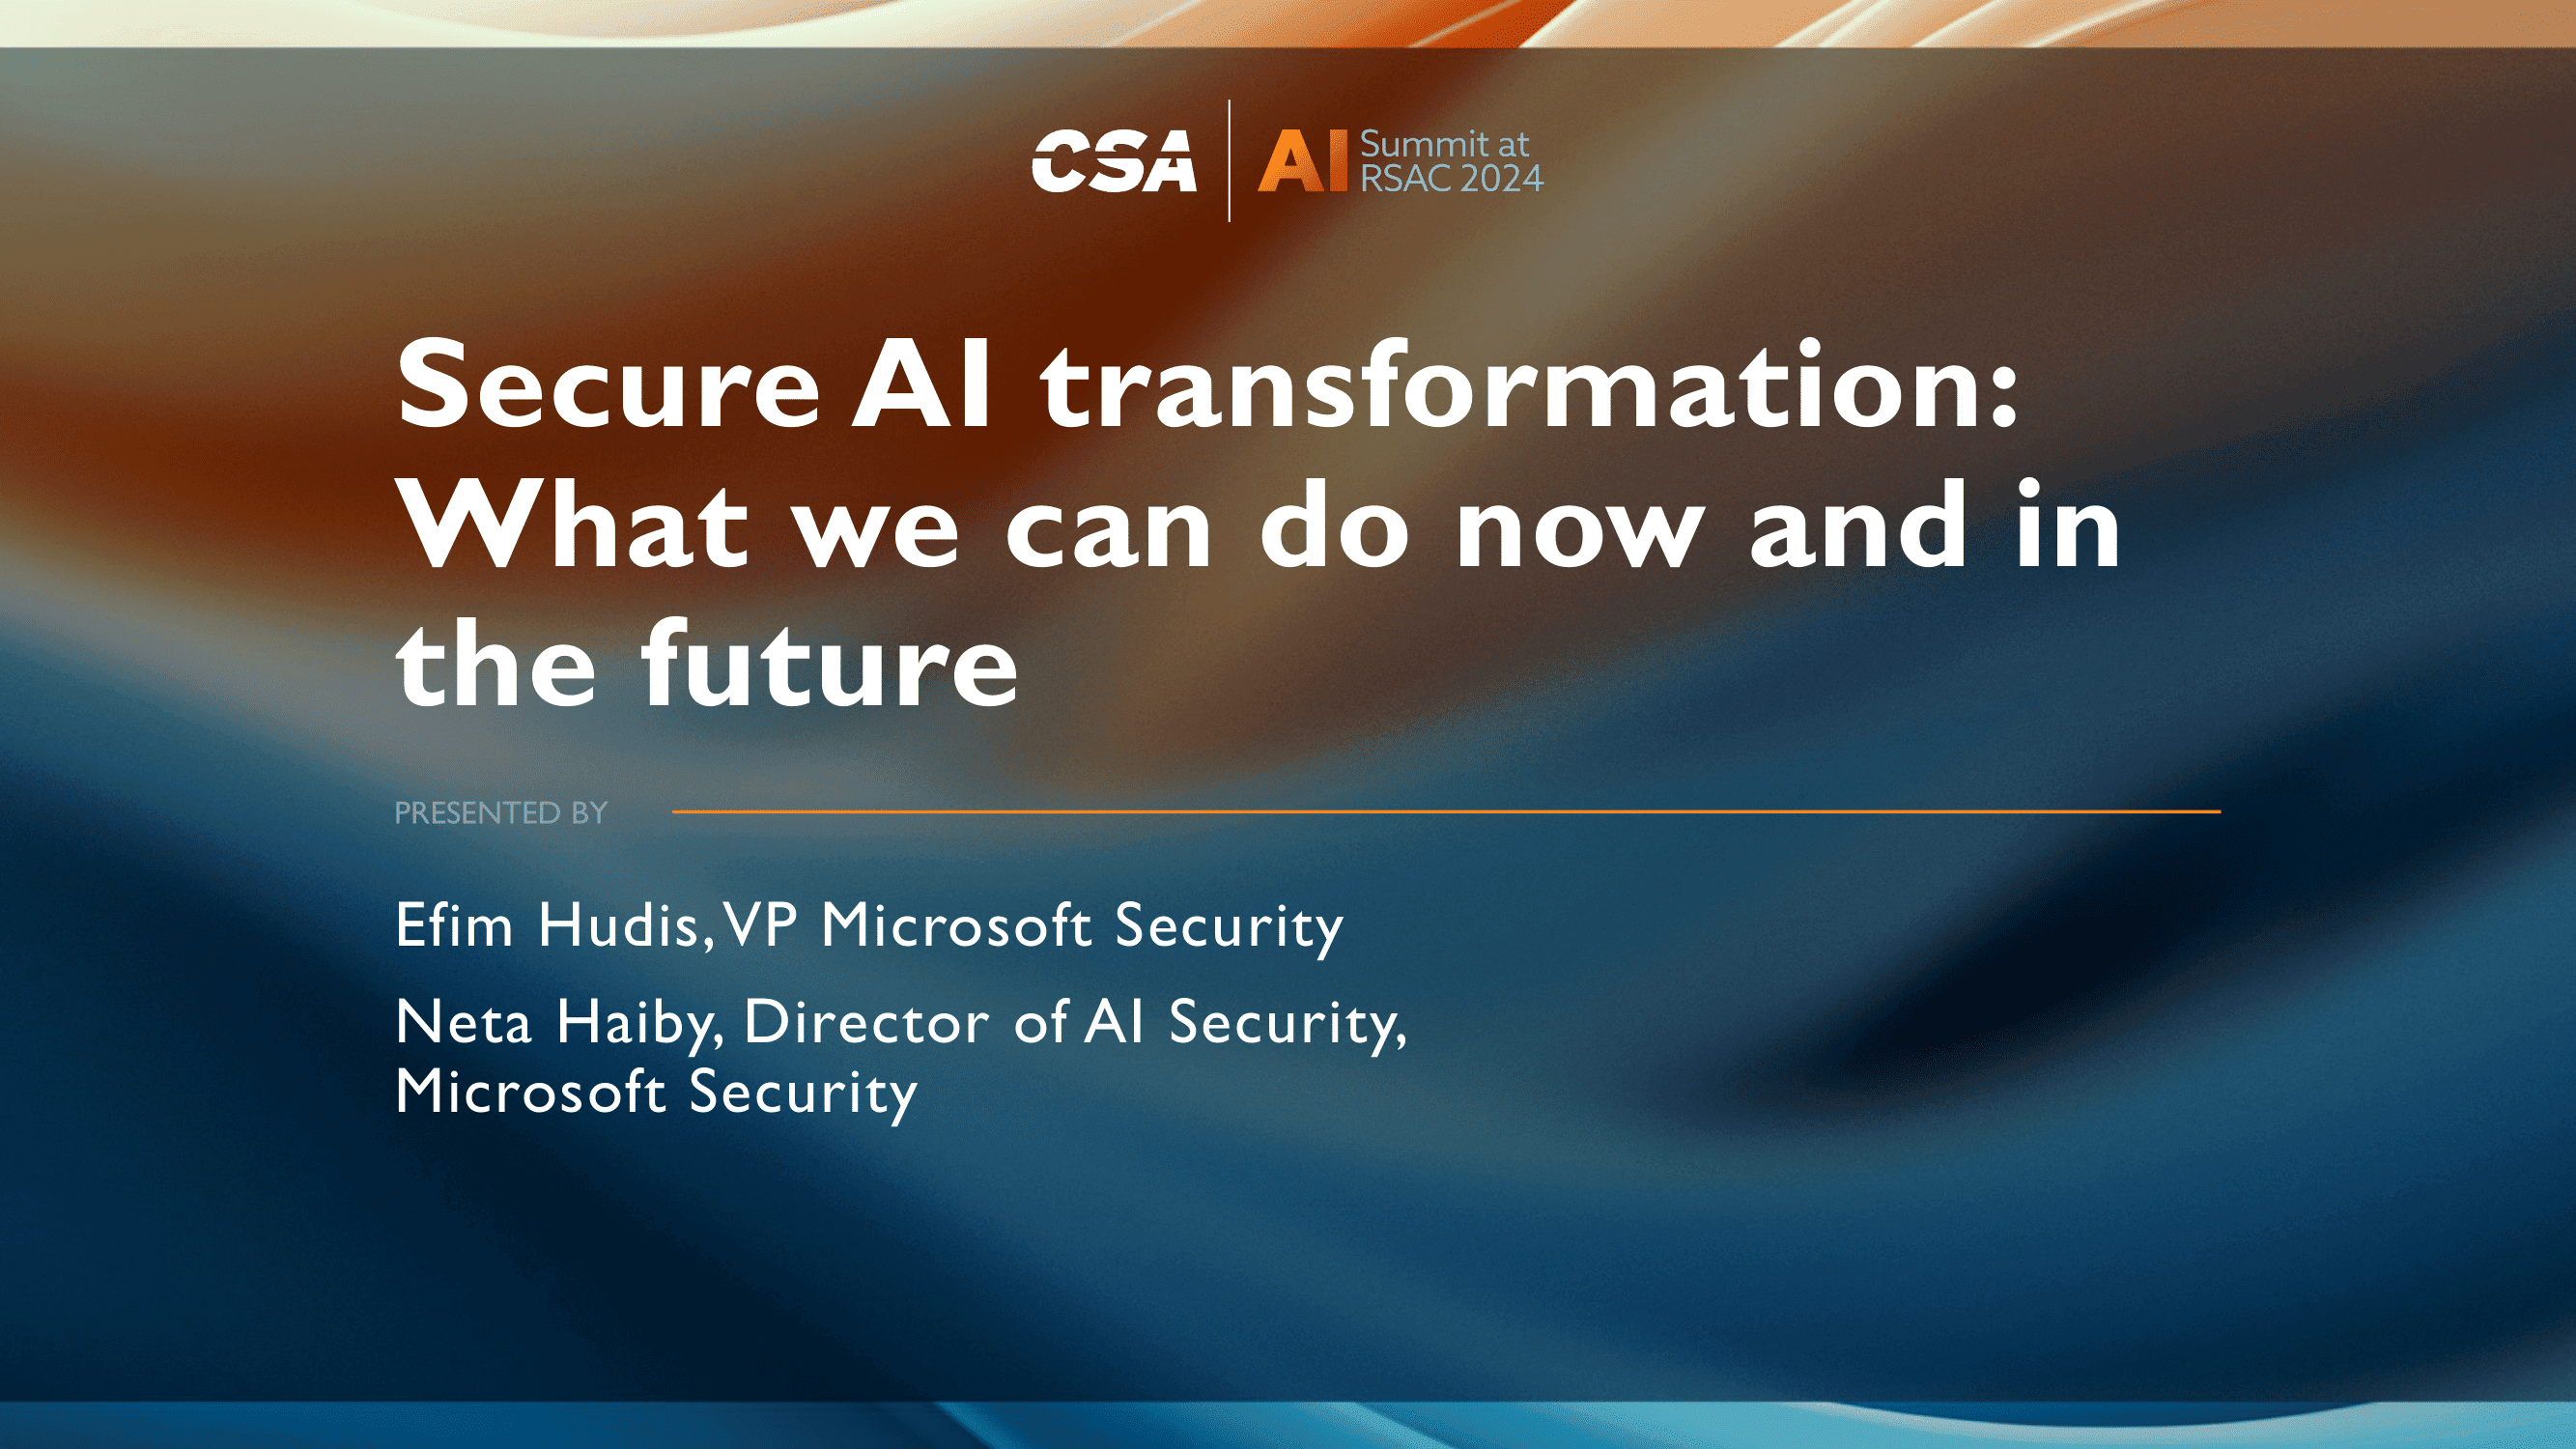 Secure AI Transformation - What We Can Do Now and in the Future